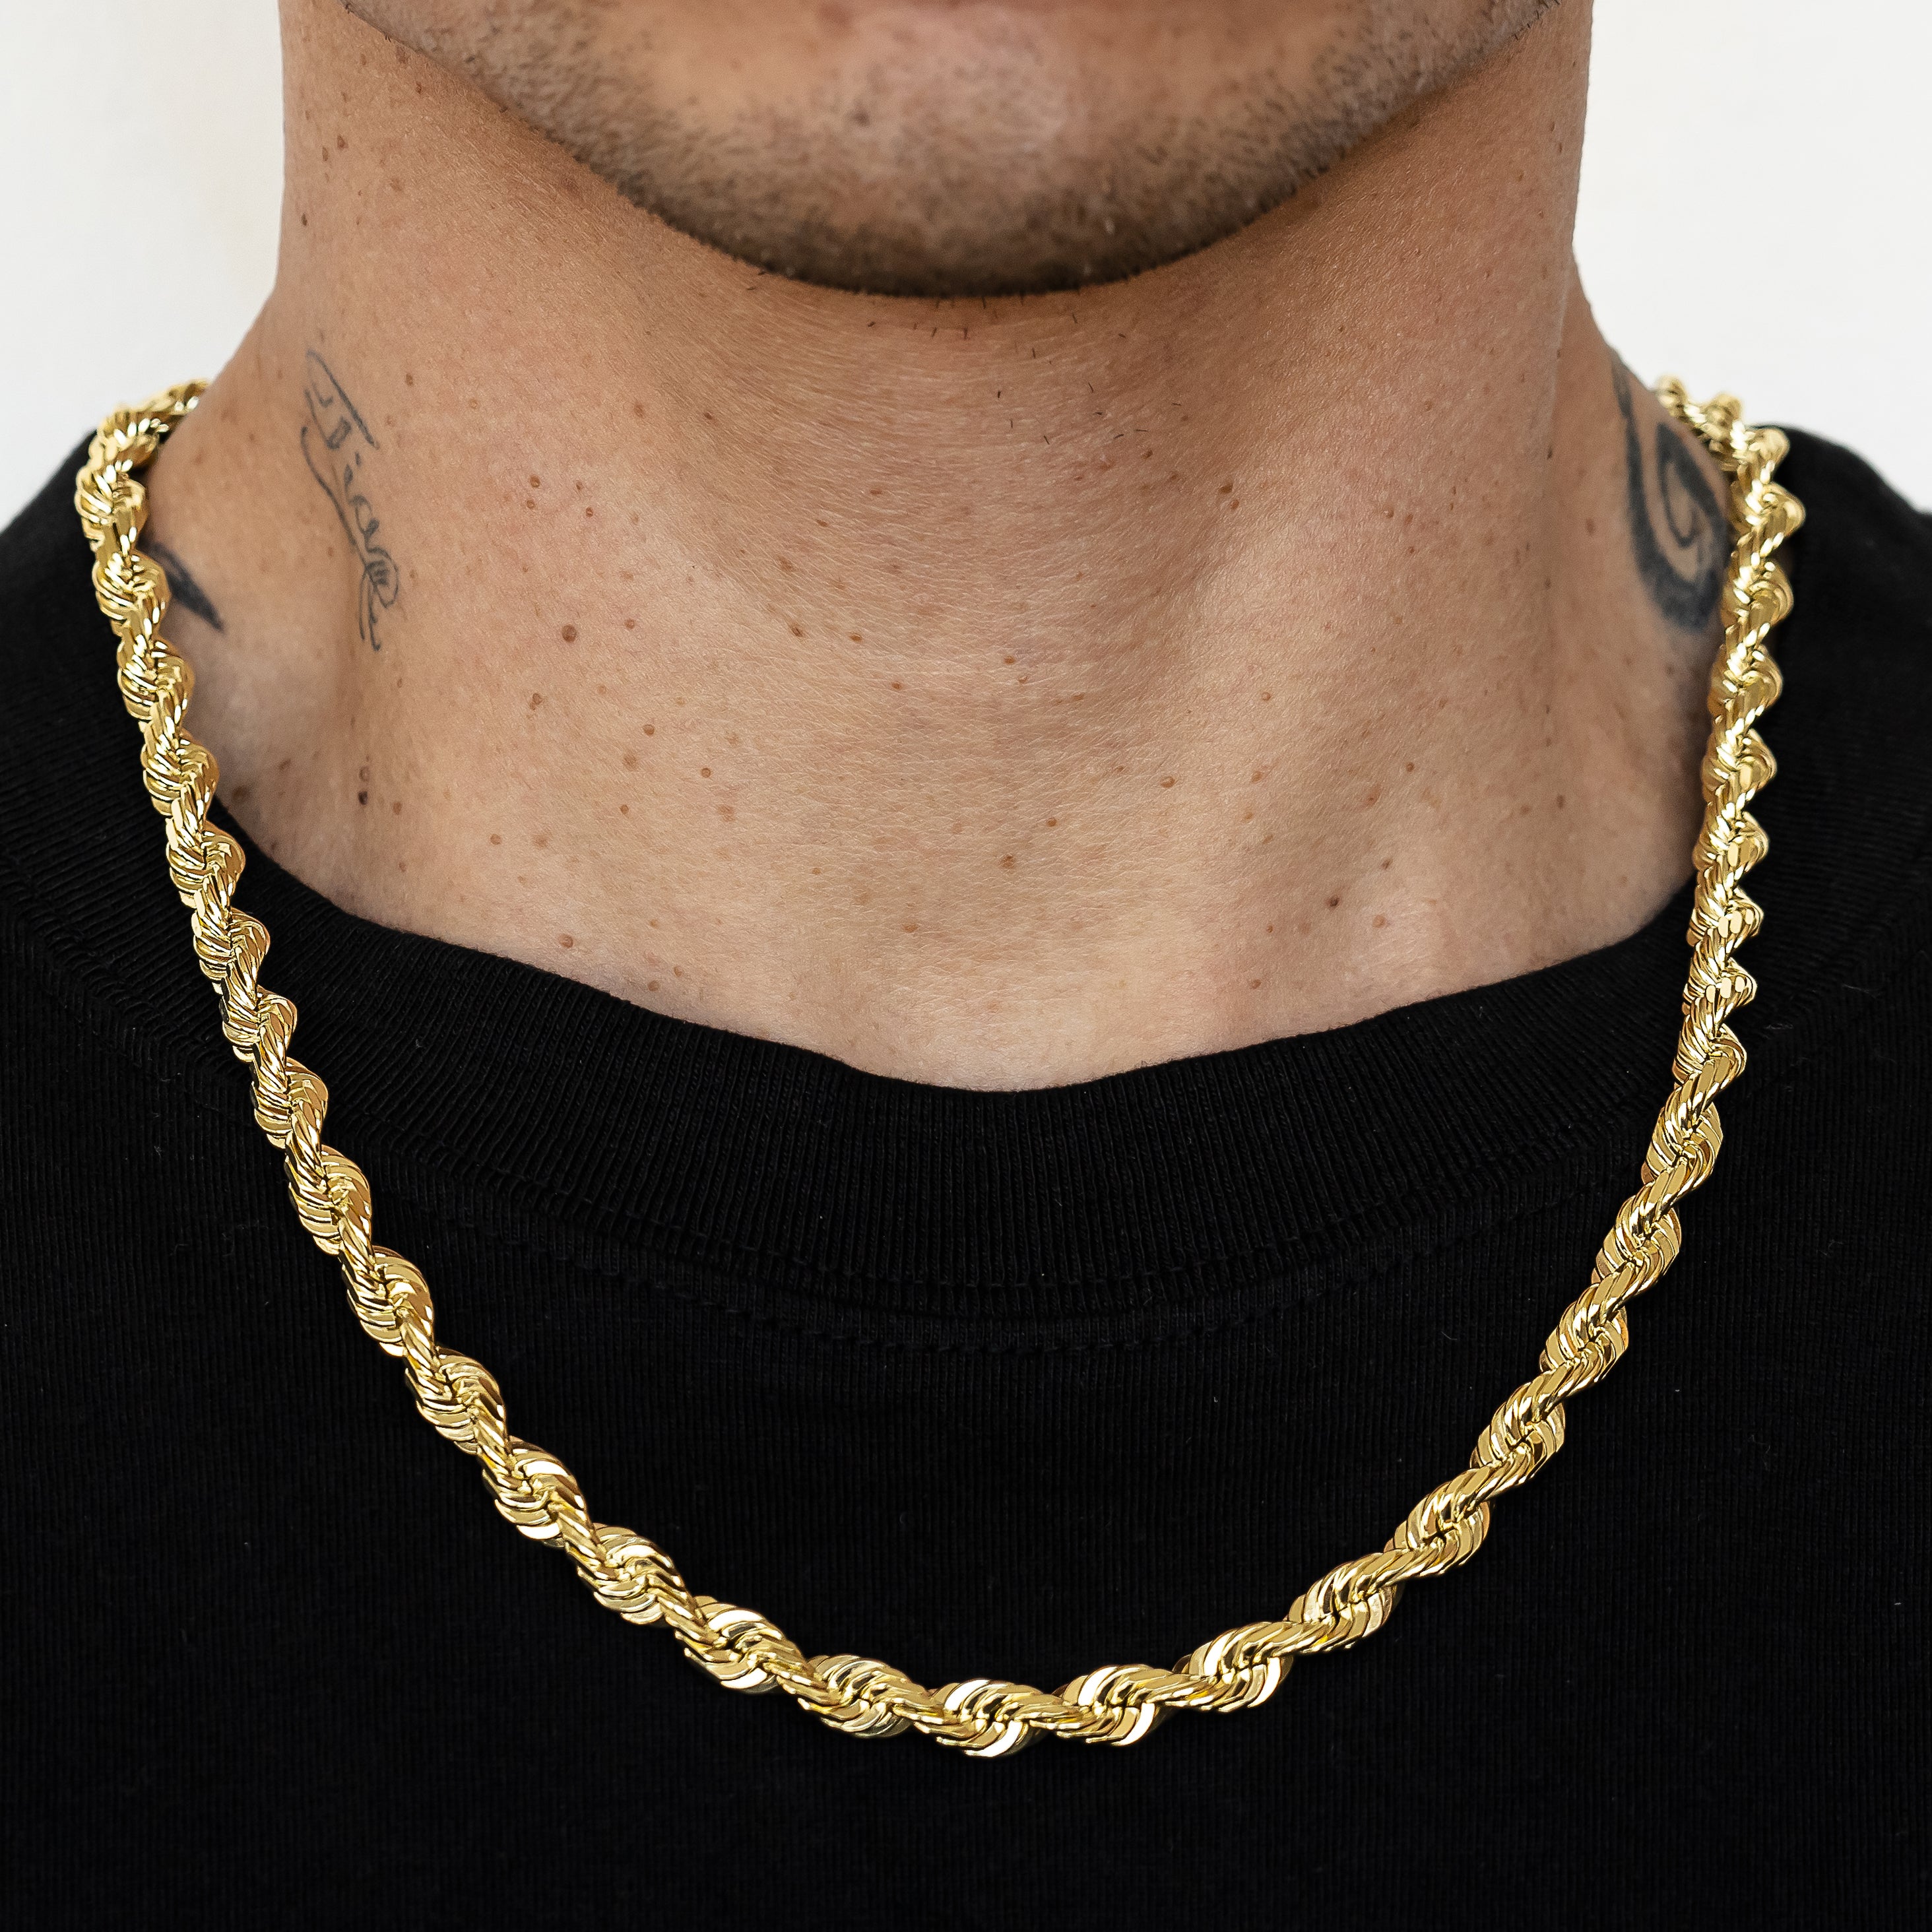 14k Yellow Gold Solid Diamond Cut Rope Chain